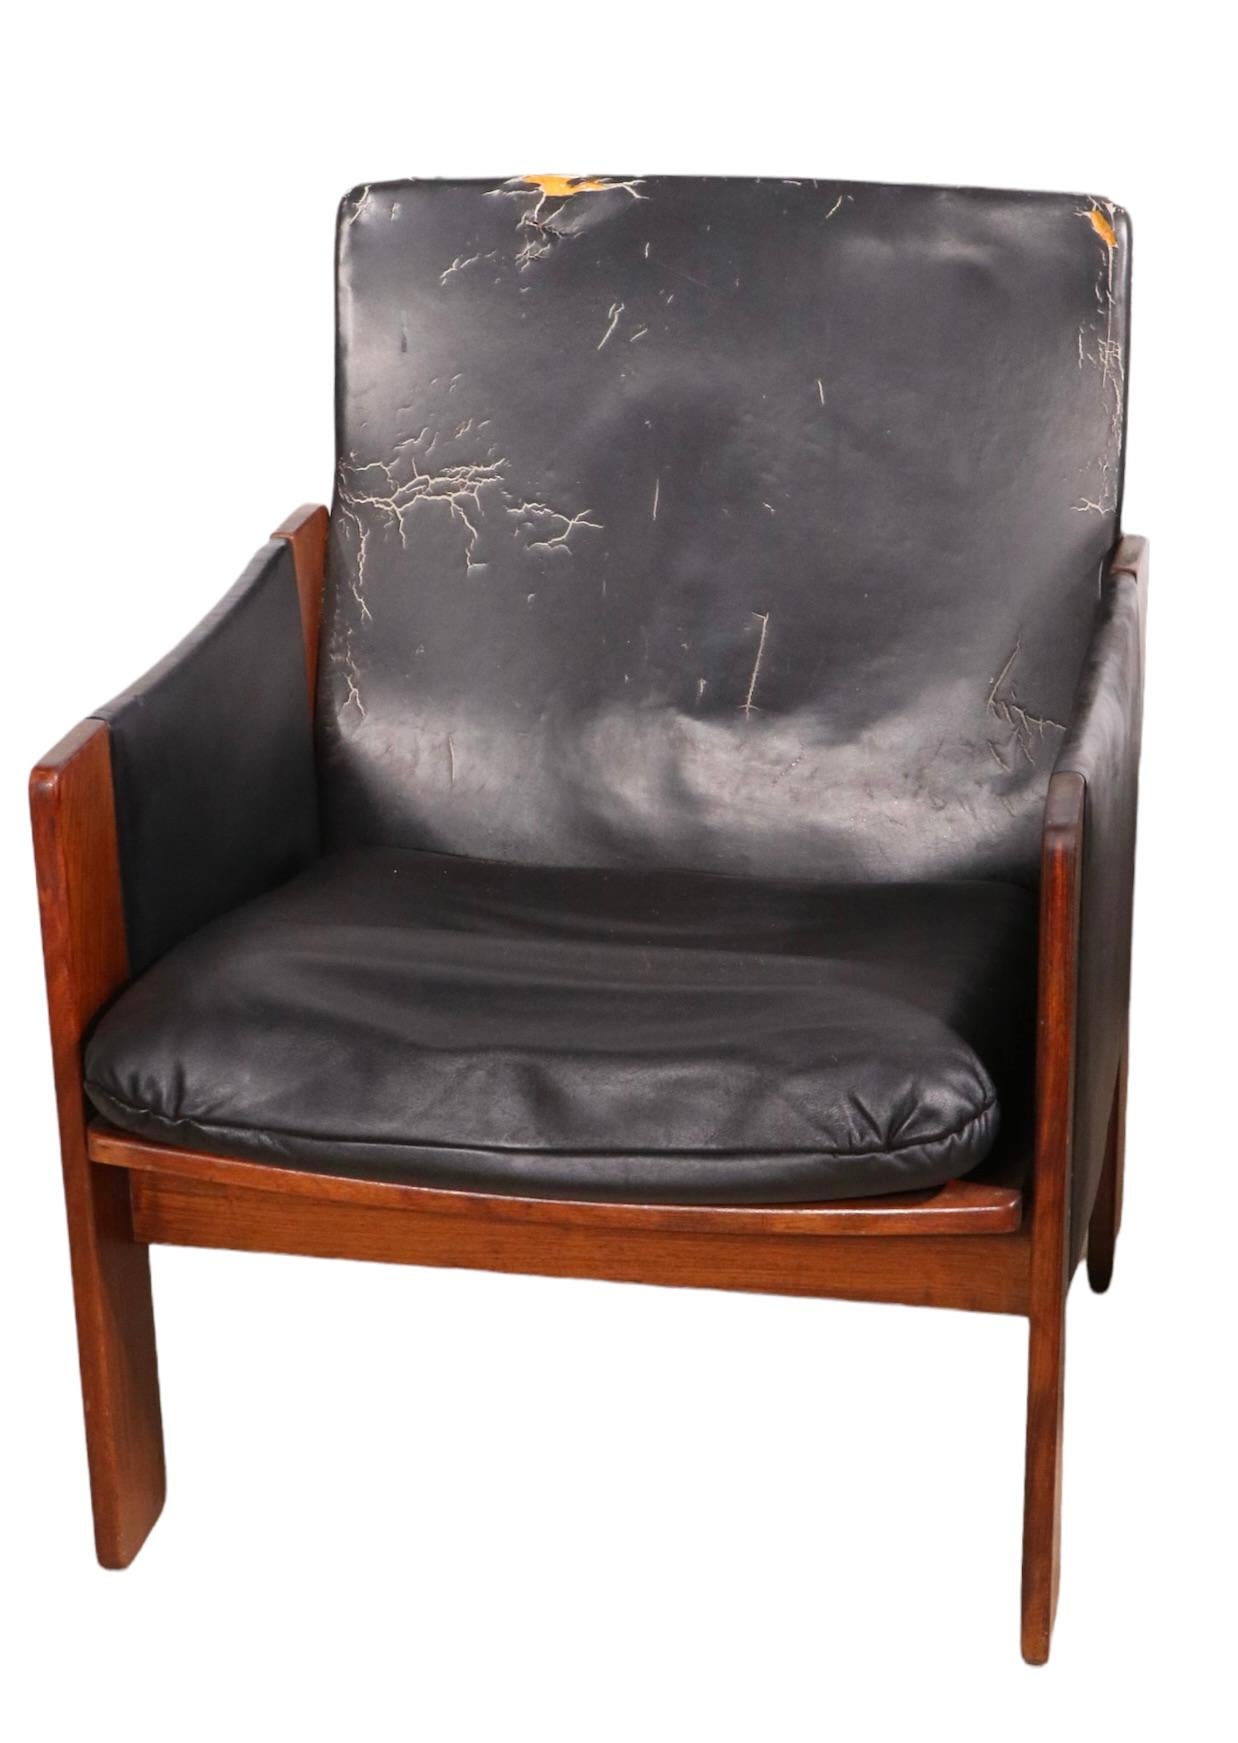 Pr. Rosewood and Leather Lounge Arm Chairs by Tobia Scarpa for Cassina For Sale 7